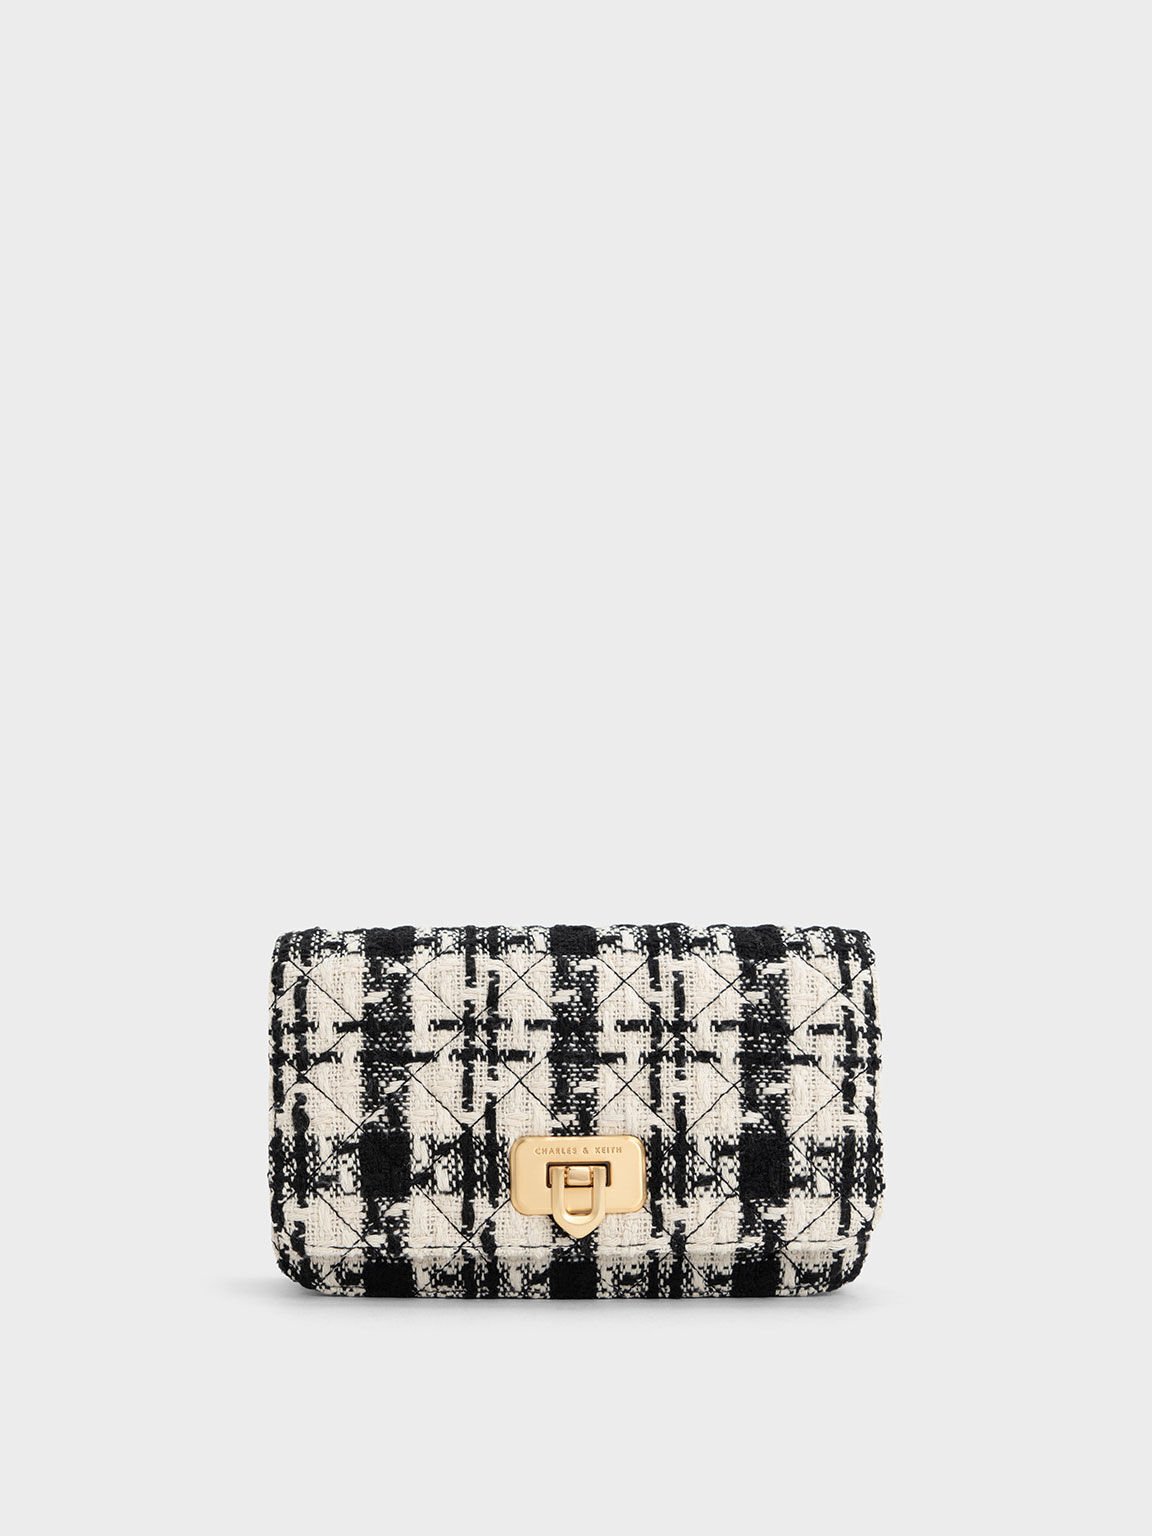 Louis Vuitton products for sale - Shop with Afterpay 